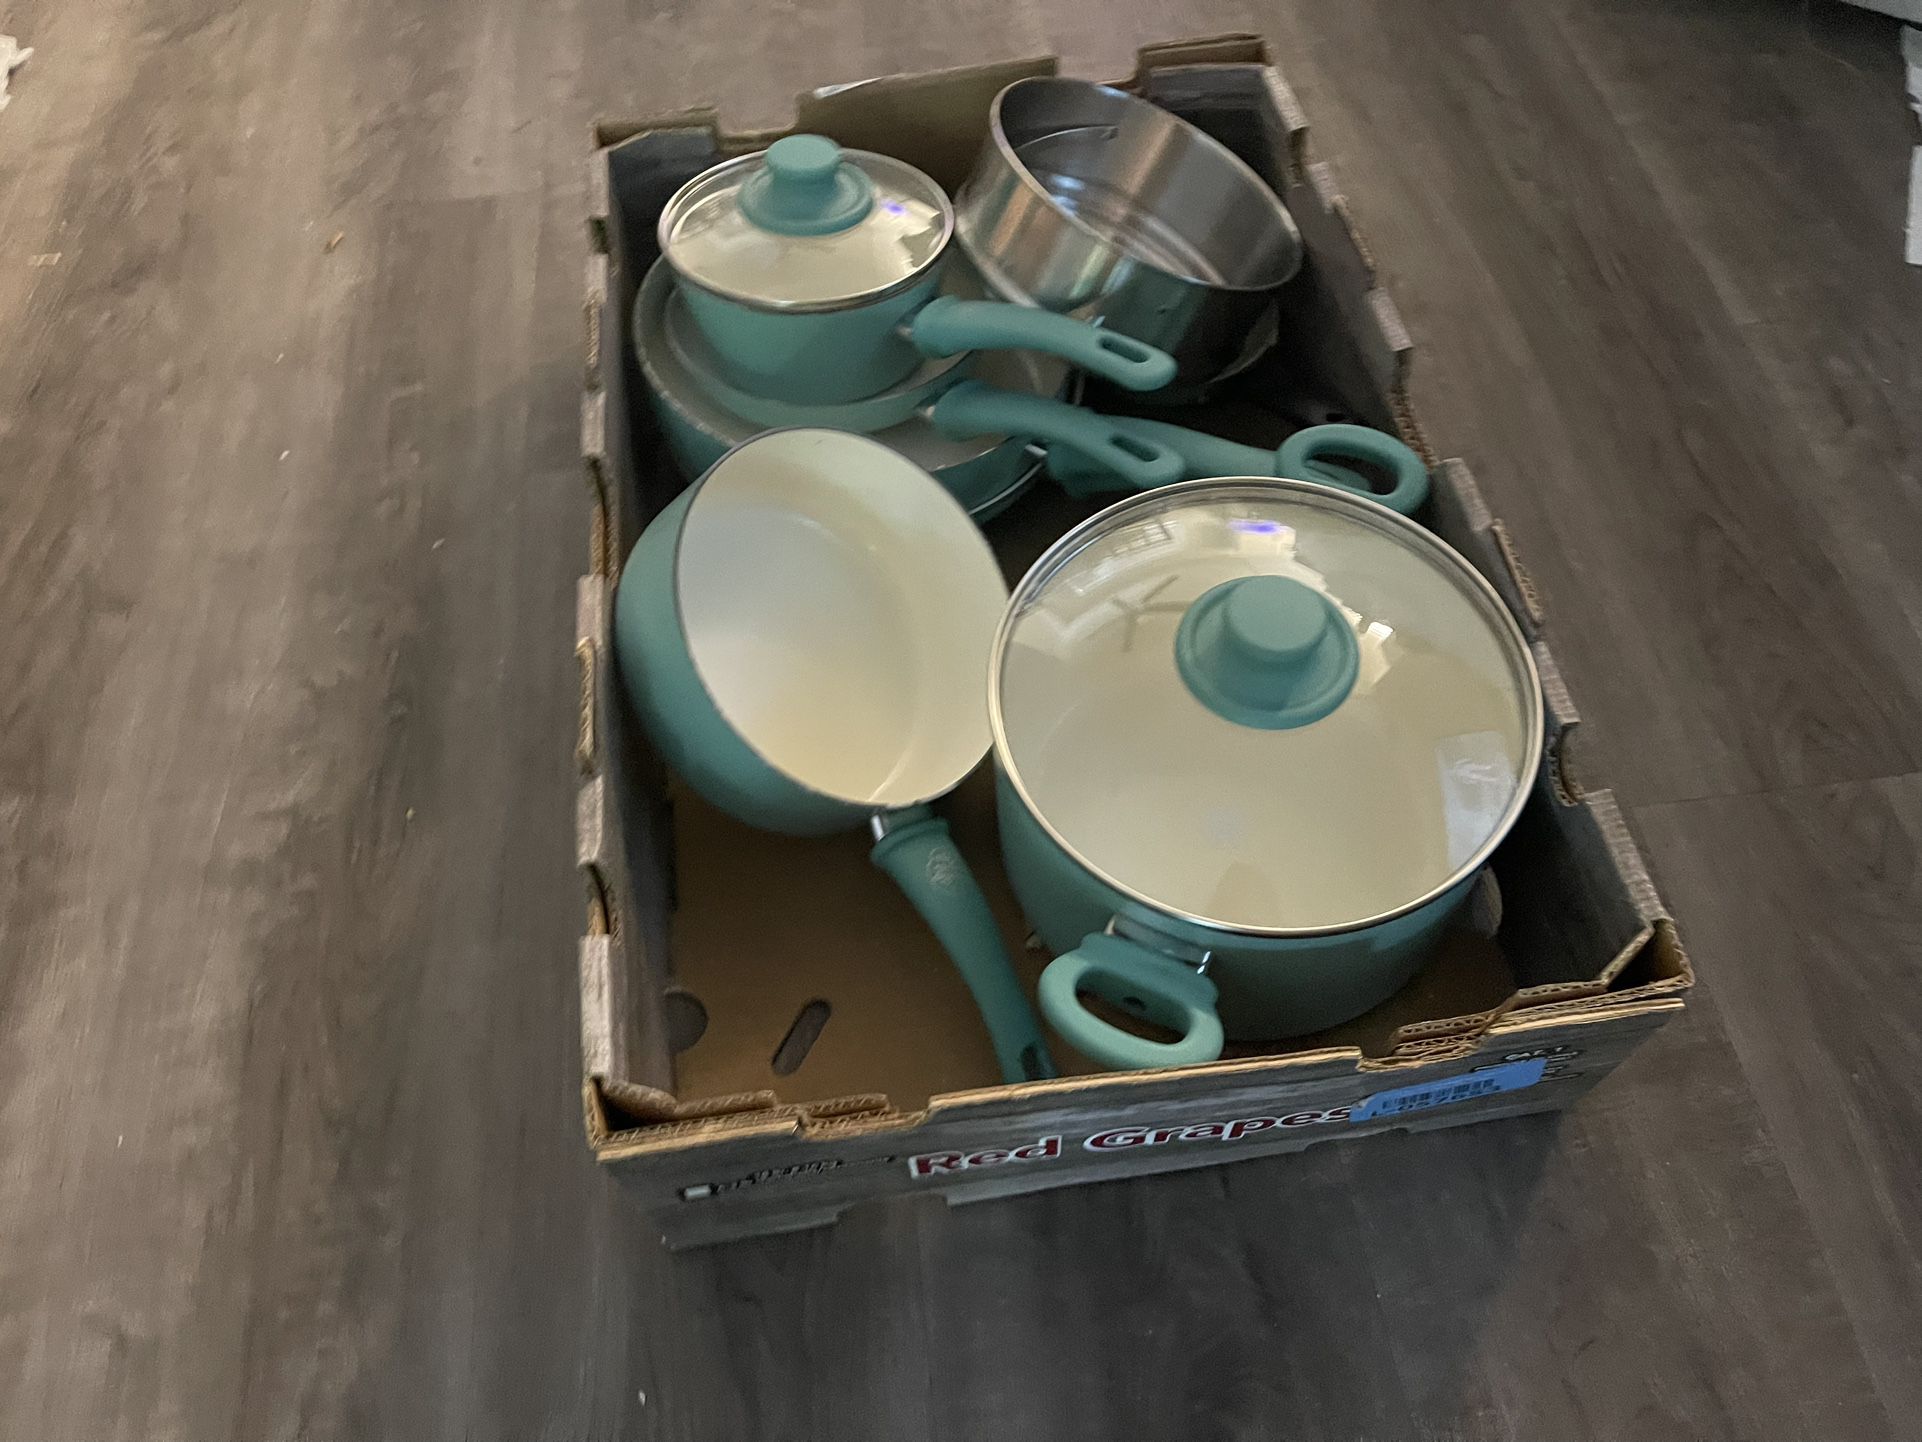 Green Life Pots & Pans Set with Utensils for Sale in Los Angeles, CA -  OfferUp